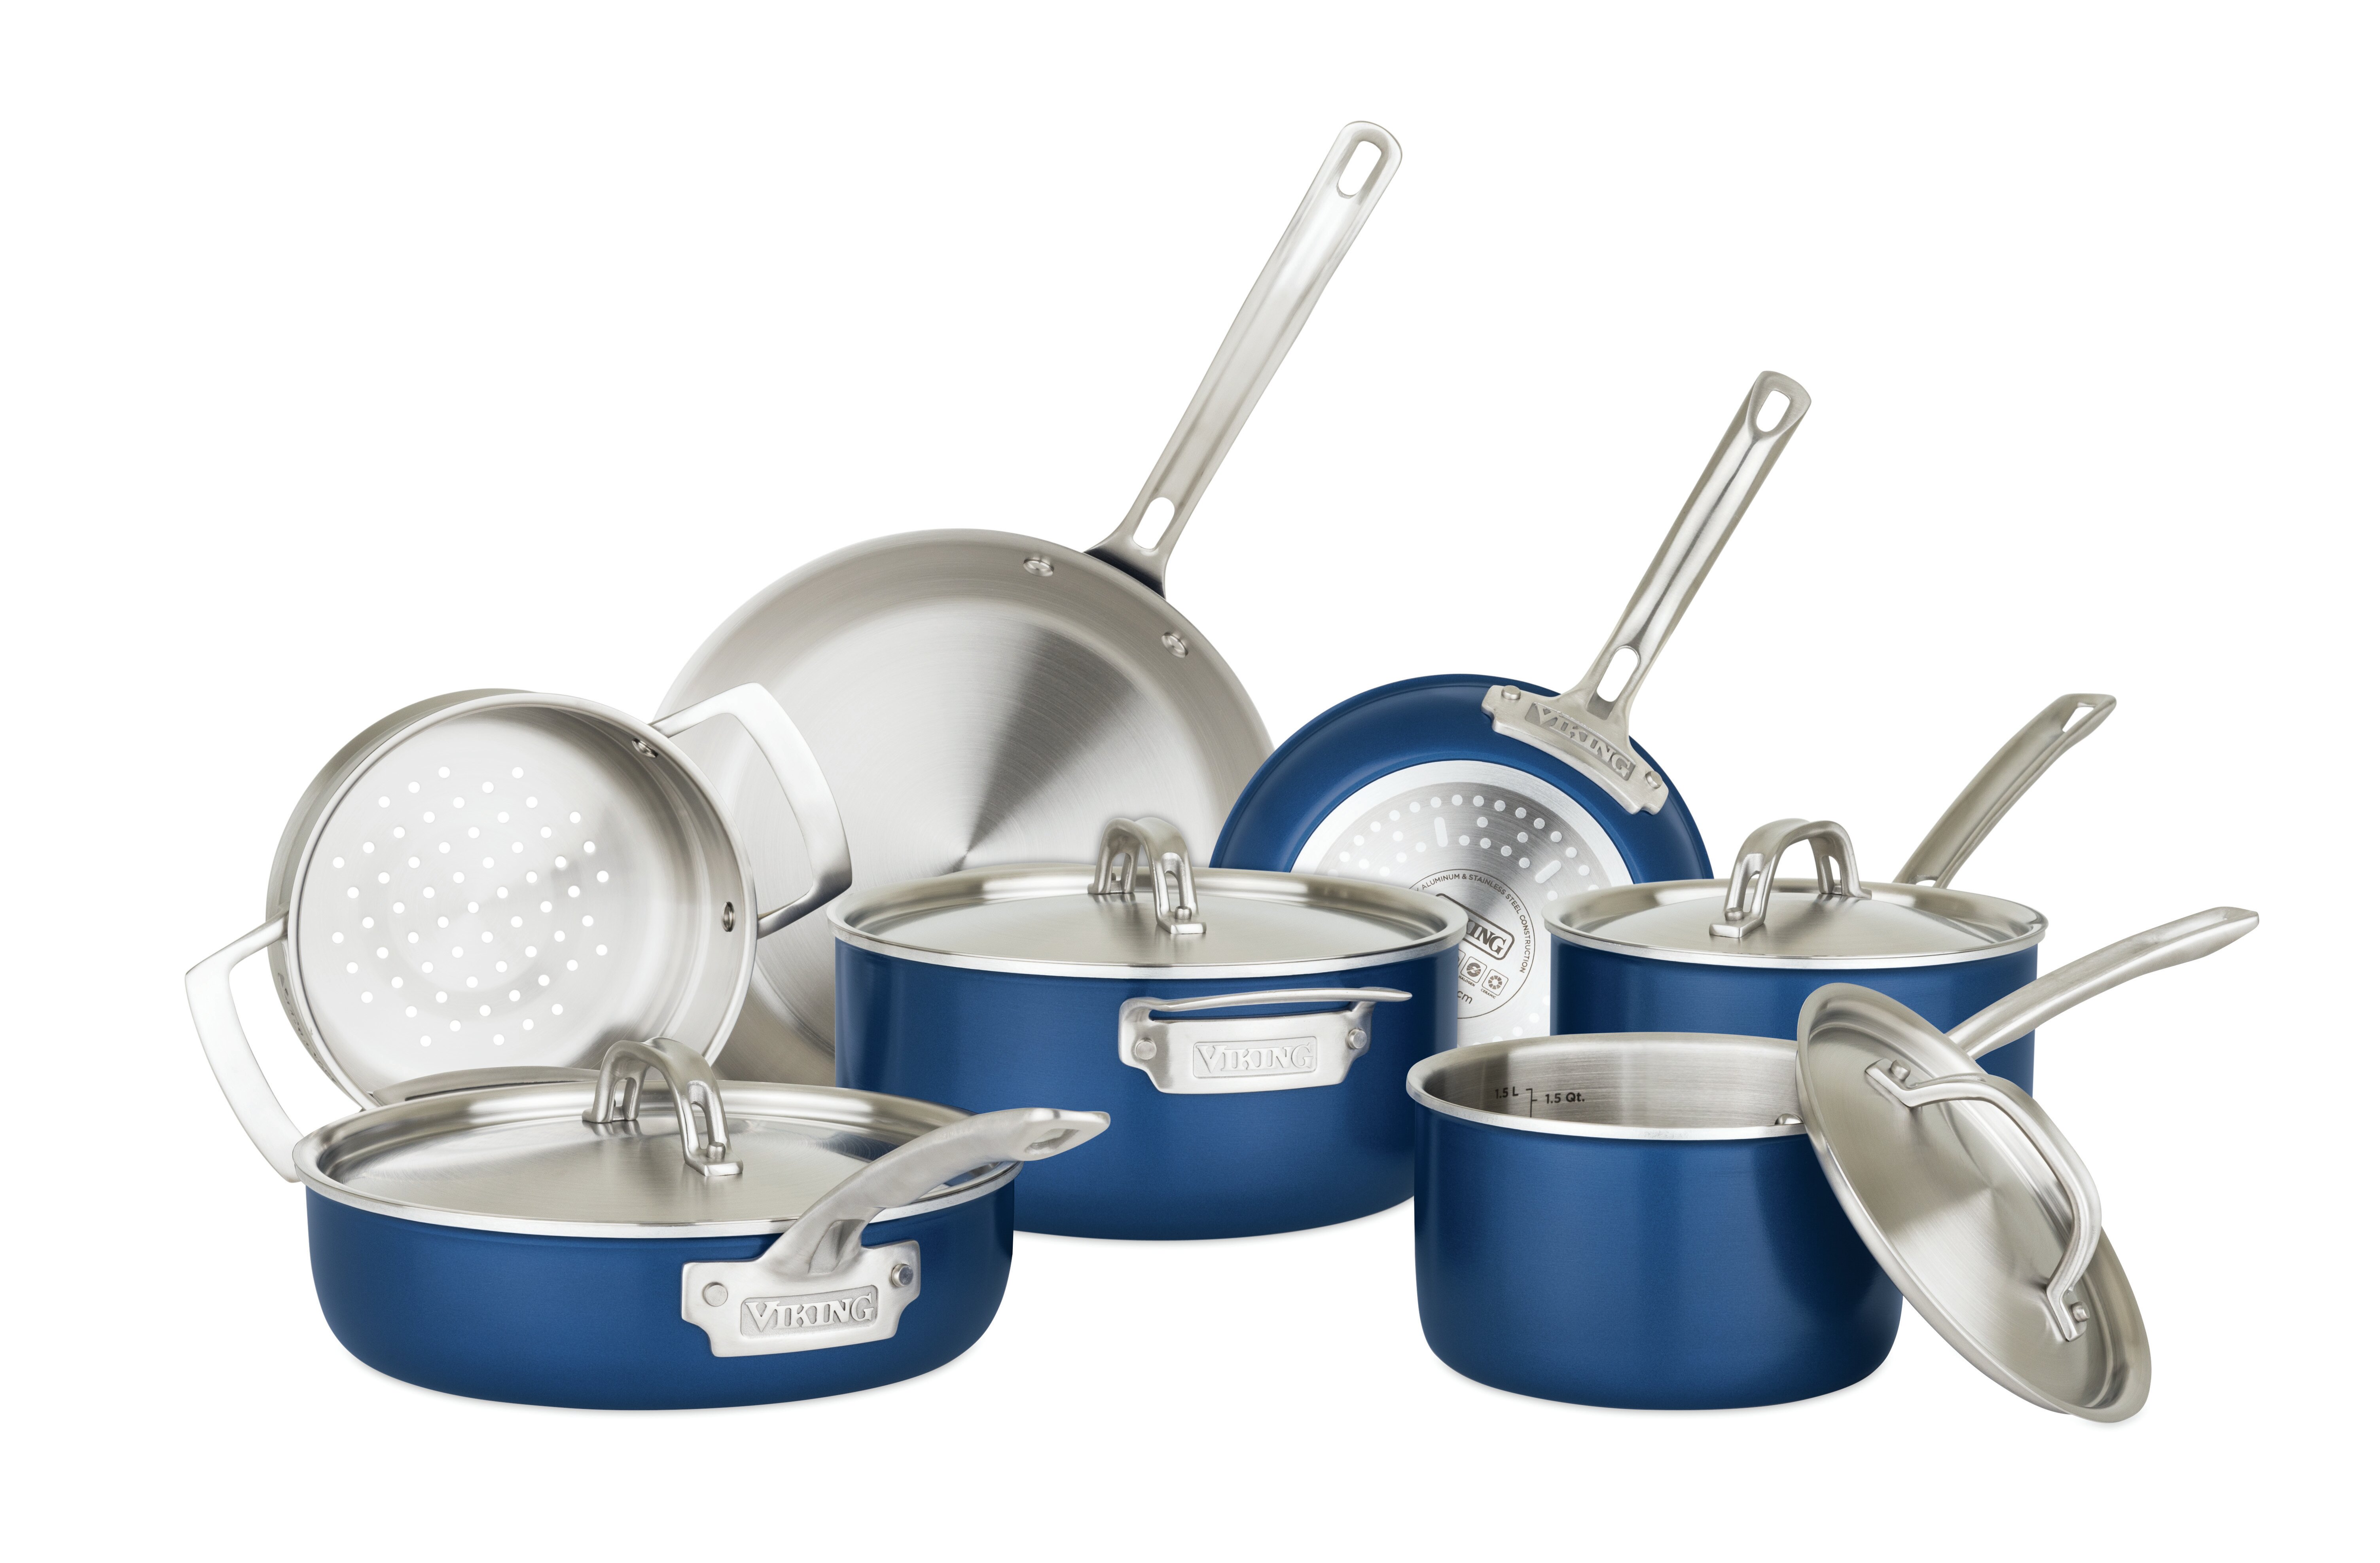 Cuisinart 76I-11 11 Piece Chef's Classic Pro Cookware Set in Stainless  Steel